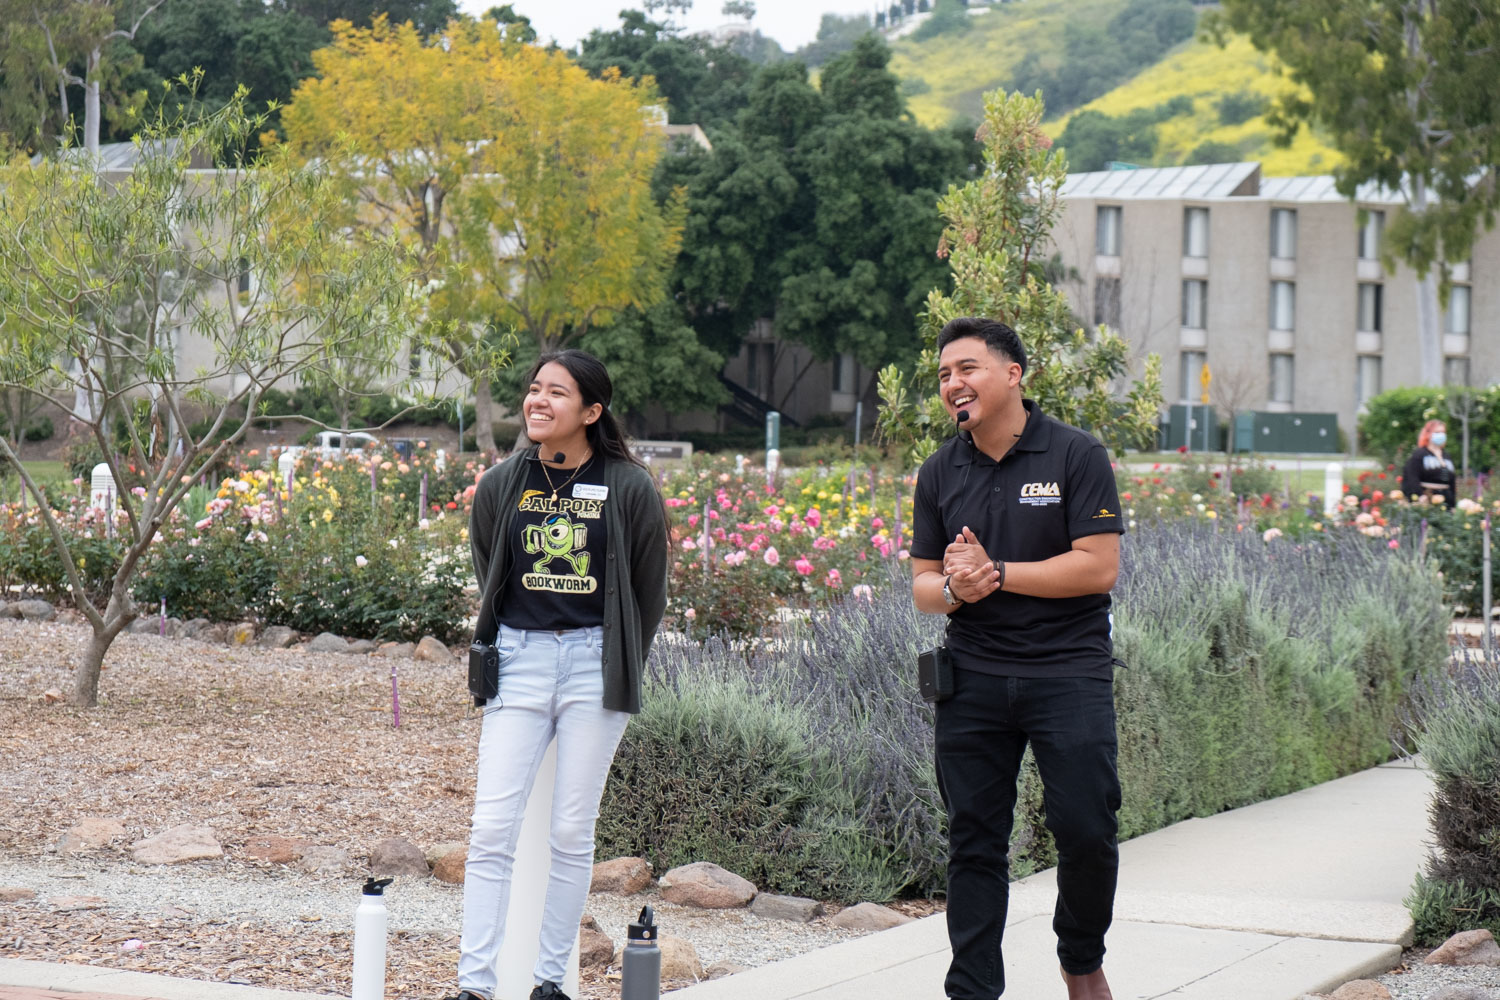 Cal Poly Pomona visitor services